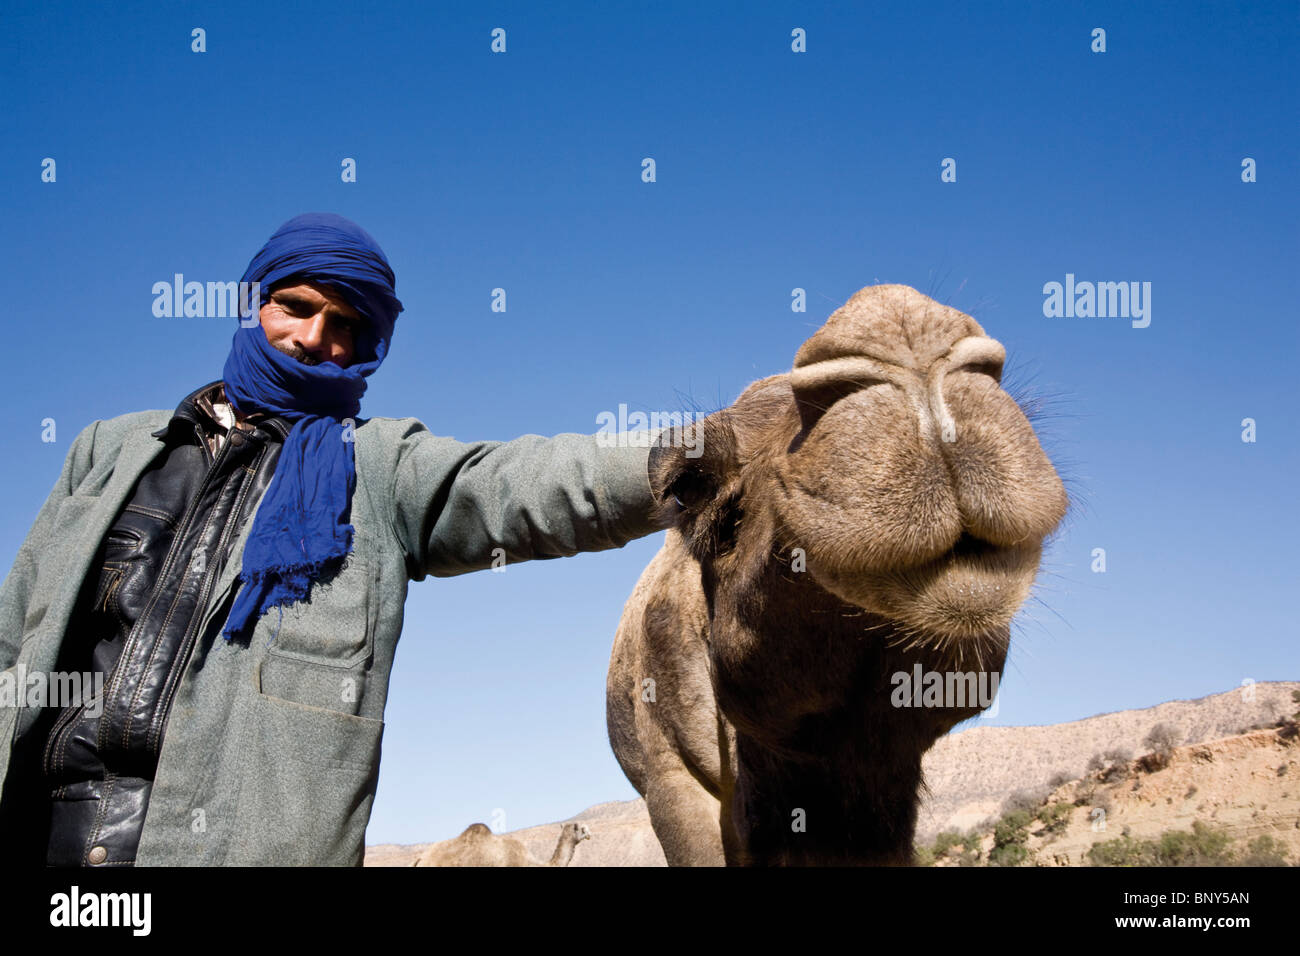 Camel driver and camel, Morocco Stock Photo